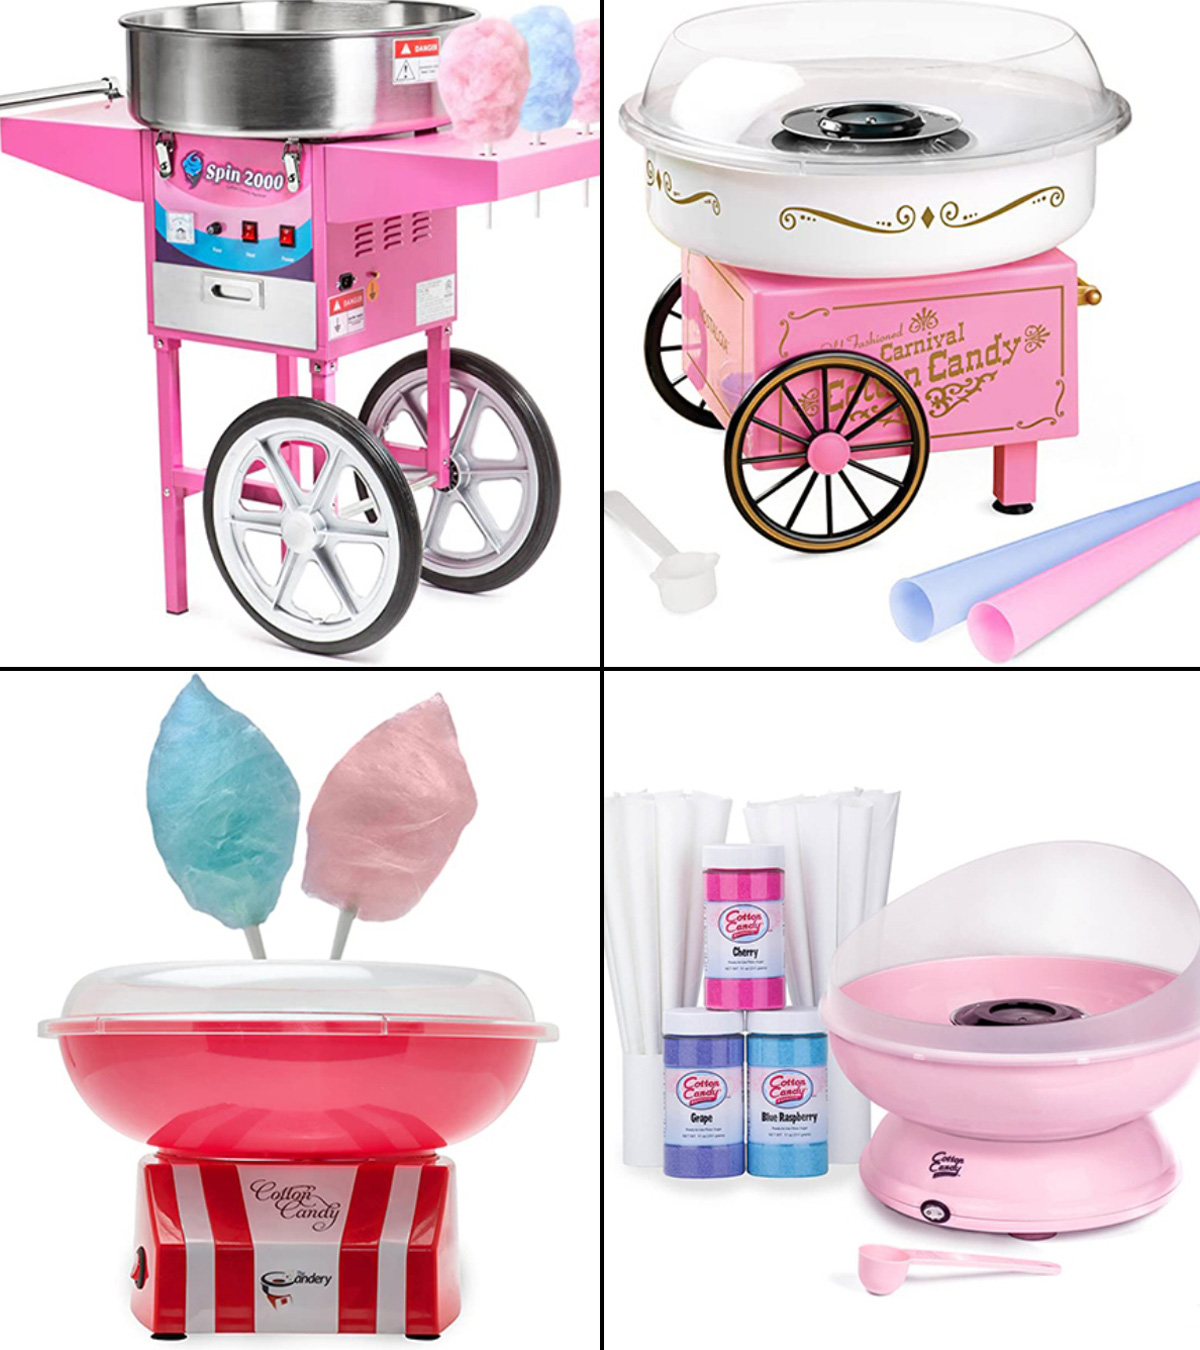 11 Best Cotton Candy Machines For Sweet Treats, As Per Food Experts 2023